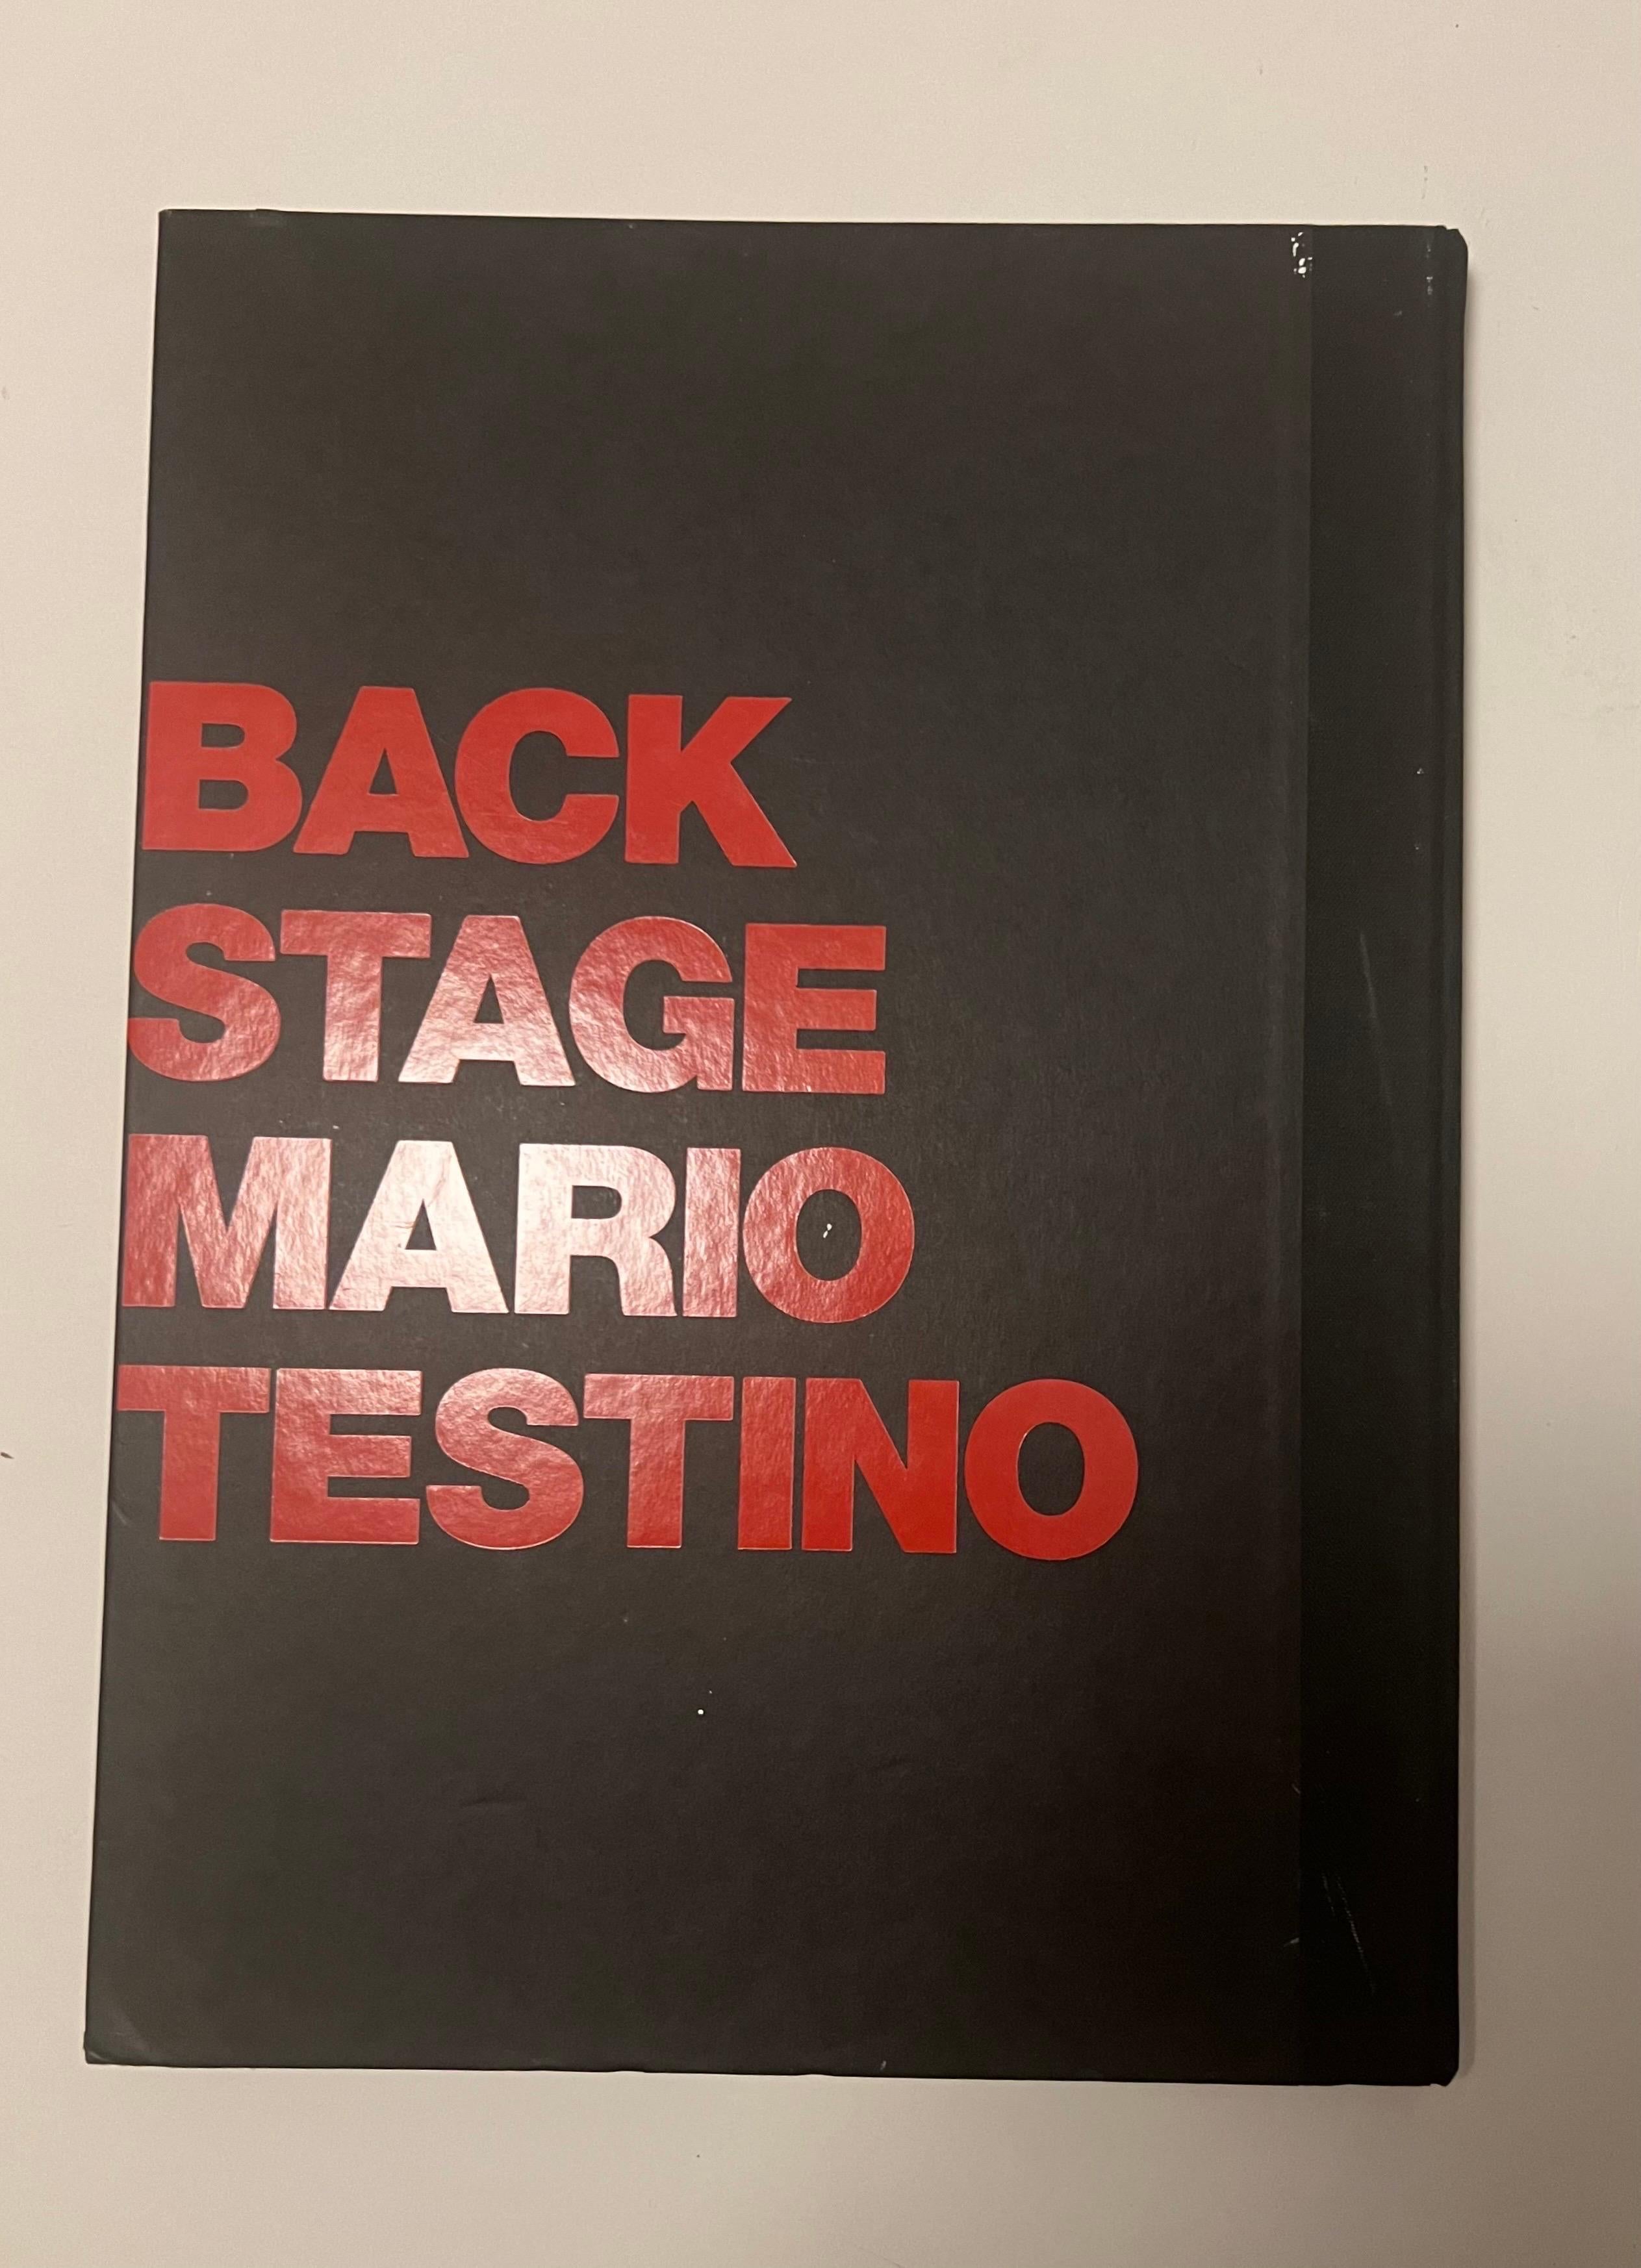 The oversize first edition hardcover book, Front Row/Backstage, by photographer Mario Testino.

Published in 1999, Front Row/Backstage captures the excitement and drama of the international shows in Paris, London and Milan. In this book, Testino has